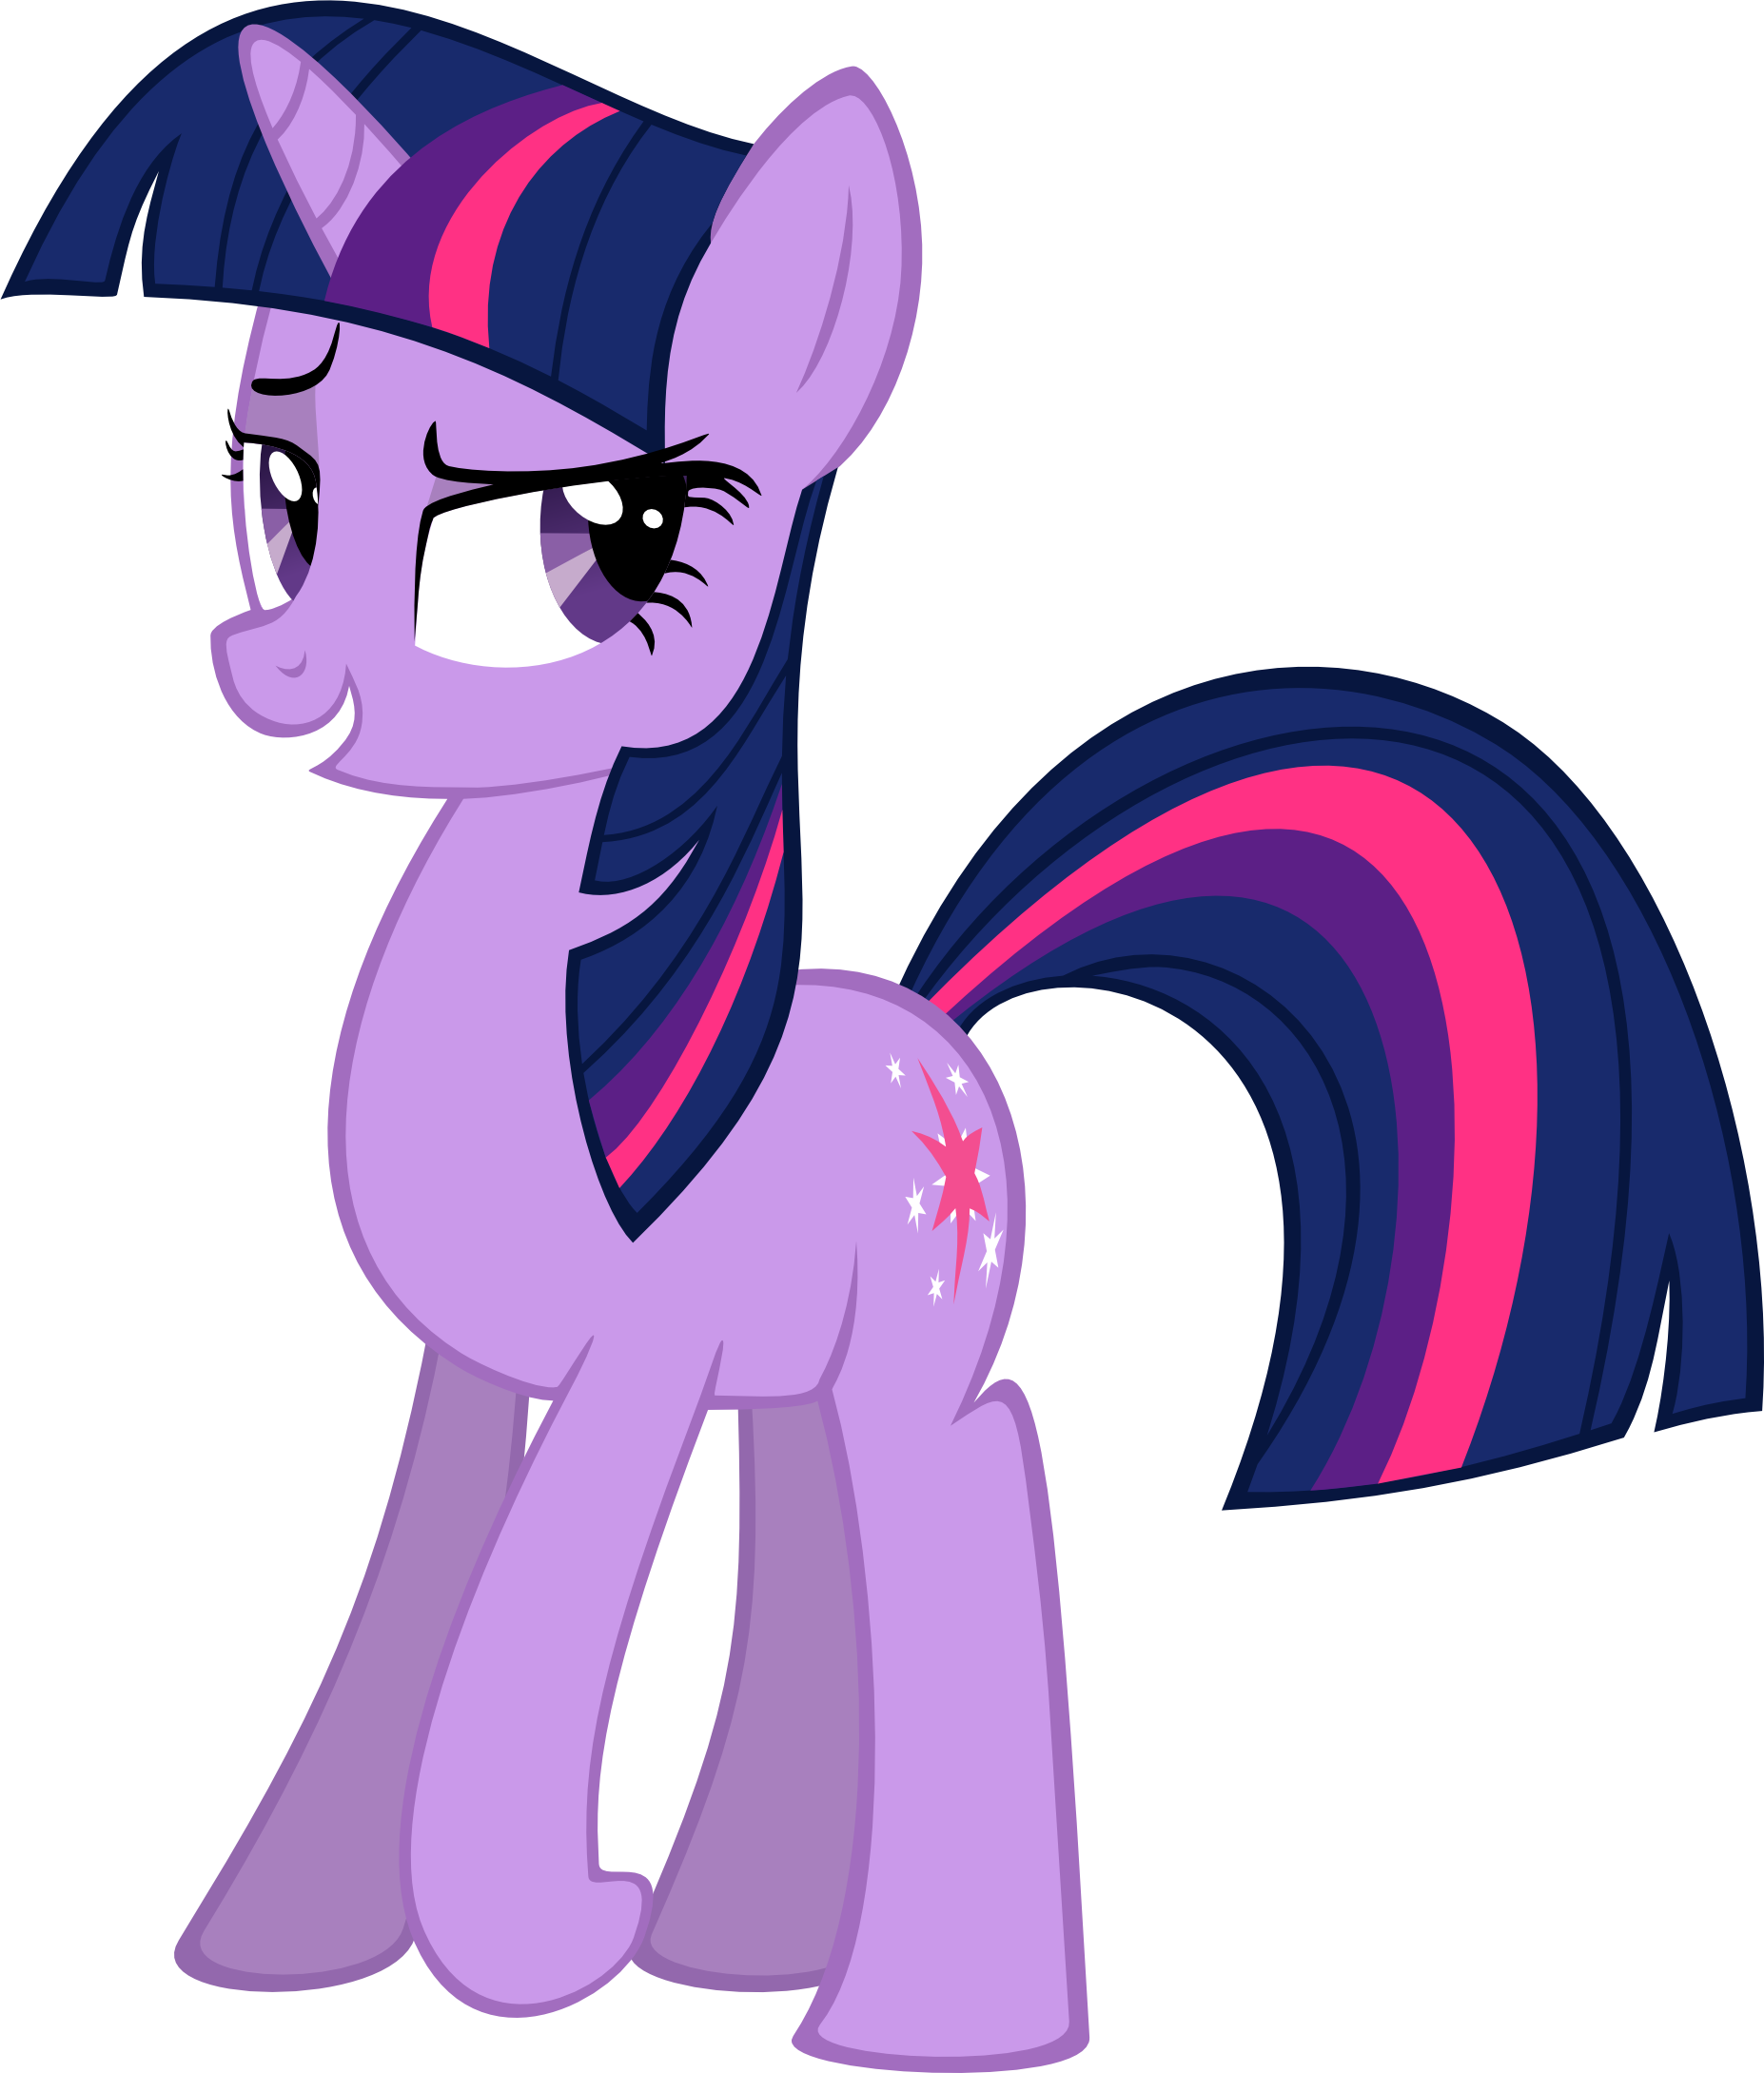 Related Pictures My Little Pony Twilight Sparkle Wallpaper